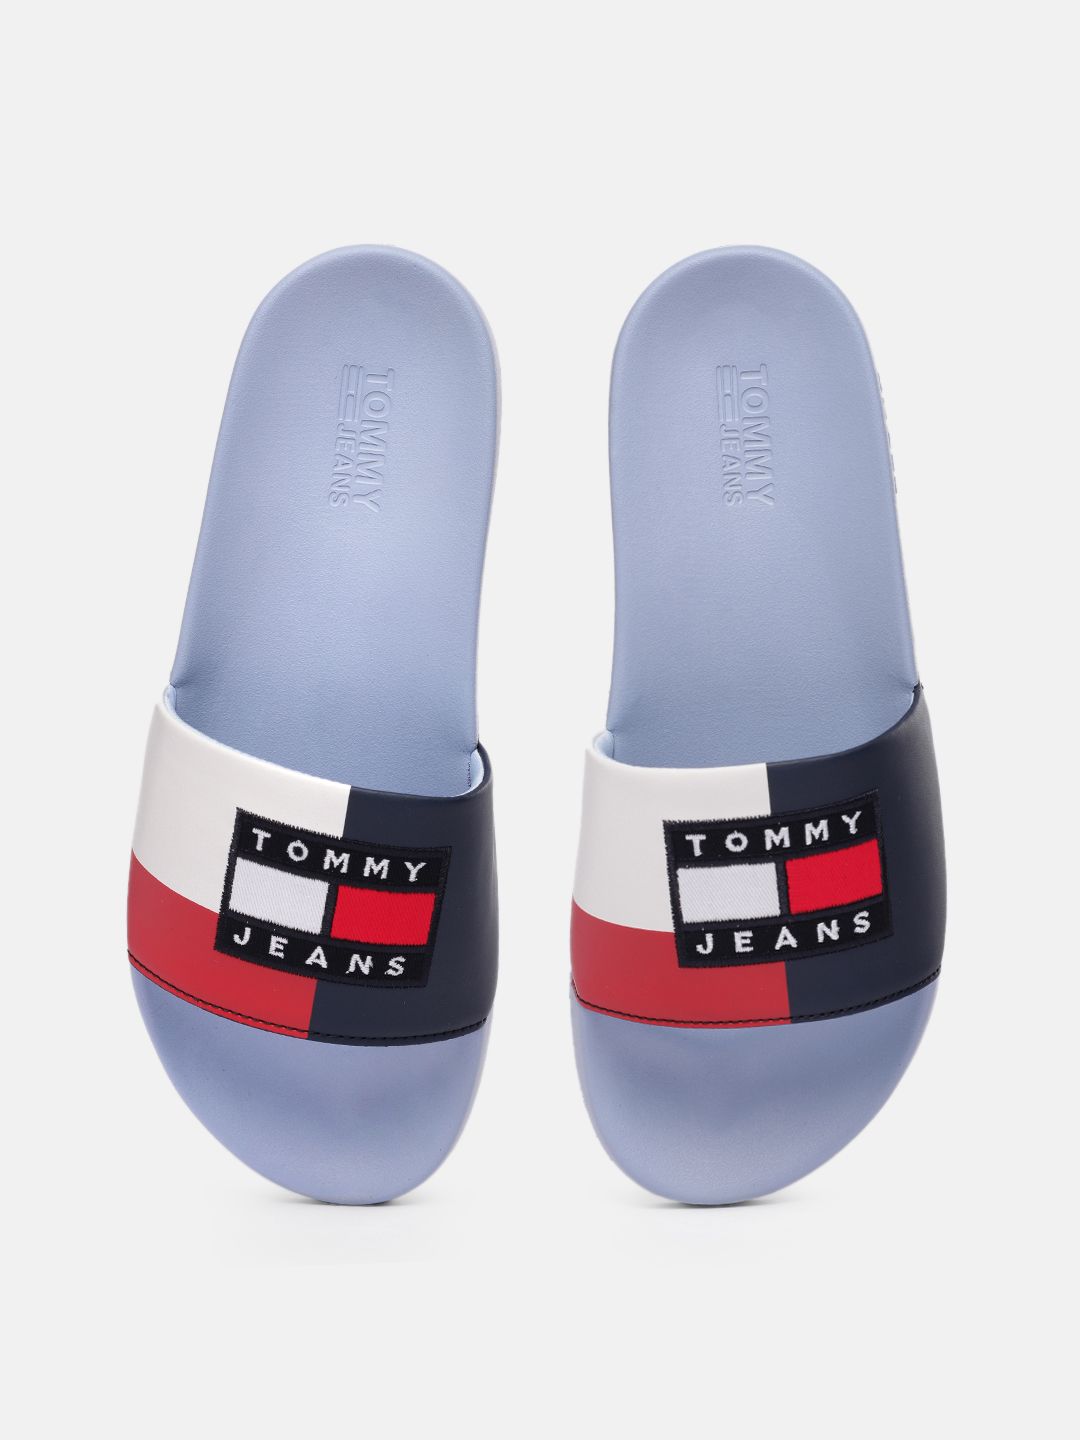 Tommy Hilfiger Women Blue & White Colourblocked Sliders Price in India